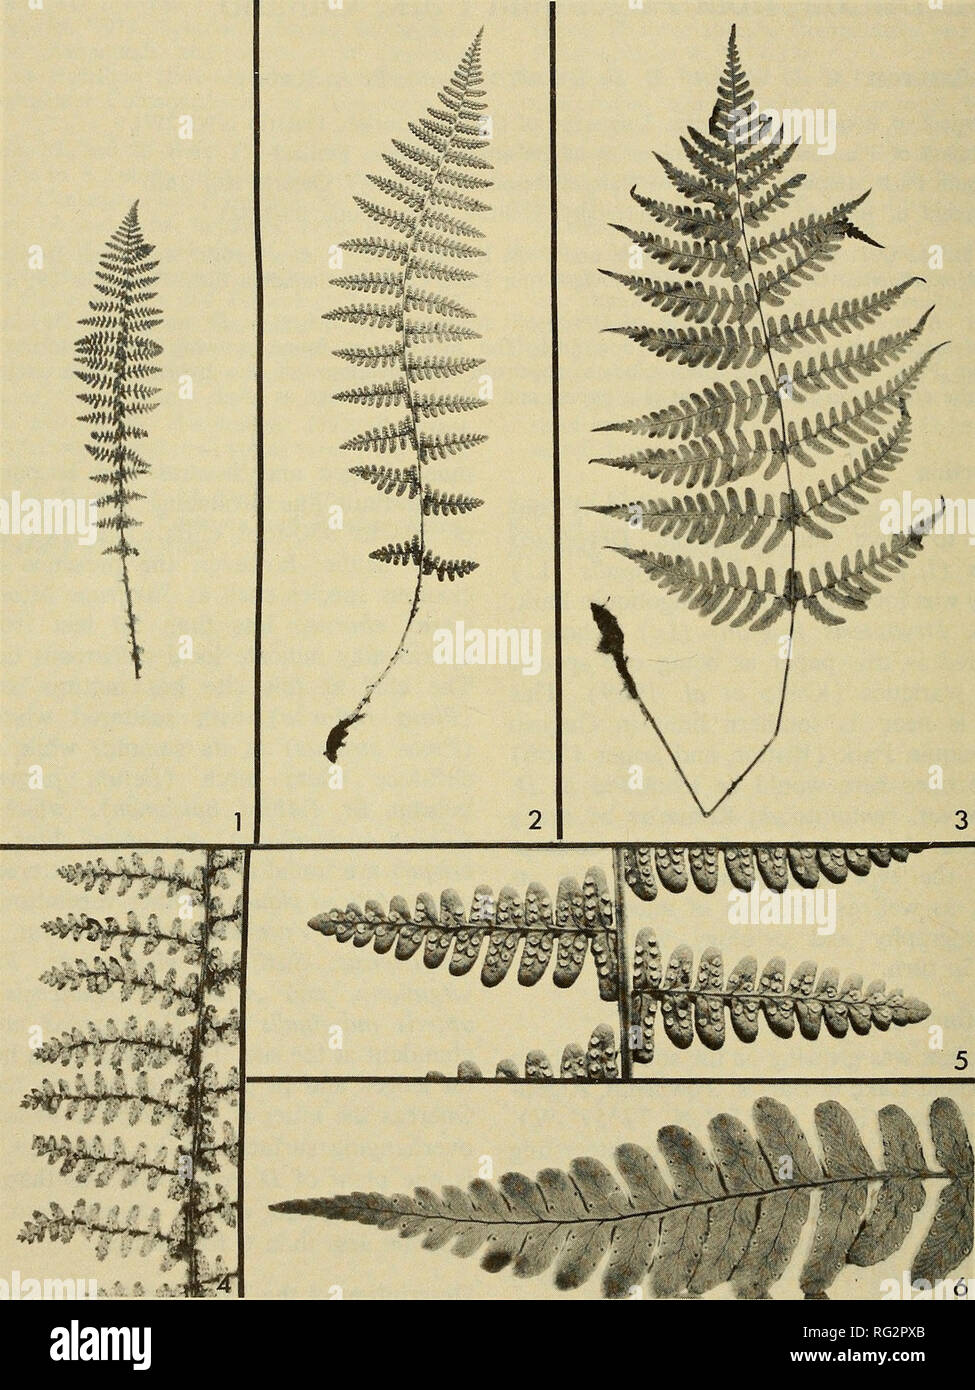 . The Canadian field-naturalist. 164 The Canadian Field-Naturalist Vol. 89. Figure 1. Leaf of Dryopteris fragrans, Britton 3207. Figure 2. Leaf of hybrid, Dryopteris X algonquin- ensis from type (Keddy and Bninton 533). Figure 3. Leaf of Dryopteris inarginalis, Britton 3206 from a plant of D. marginalis near- est hybrid. Figure 4. Portion of leaf of Dryopteris fragrans, Britton 3207. Note how indusia appear to give a fuzzy outline to the leaf. Figure 5. Portion of leaf of hybrid, Dryopteris X algonquinensis from type. Figure 6. A pinna from Dryopteris marginalis to show shape and soral positio Stock Photo